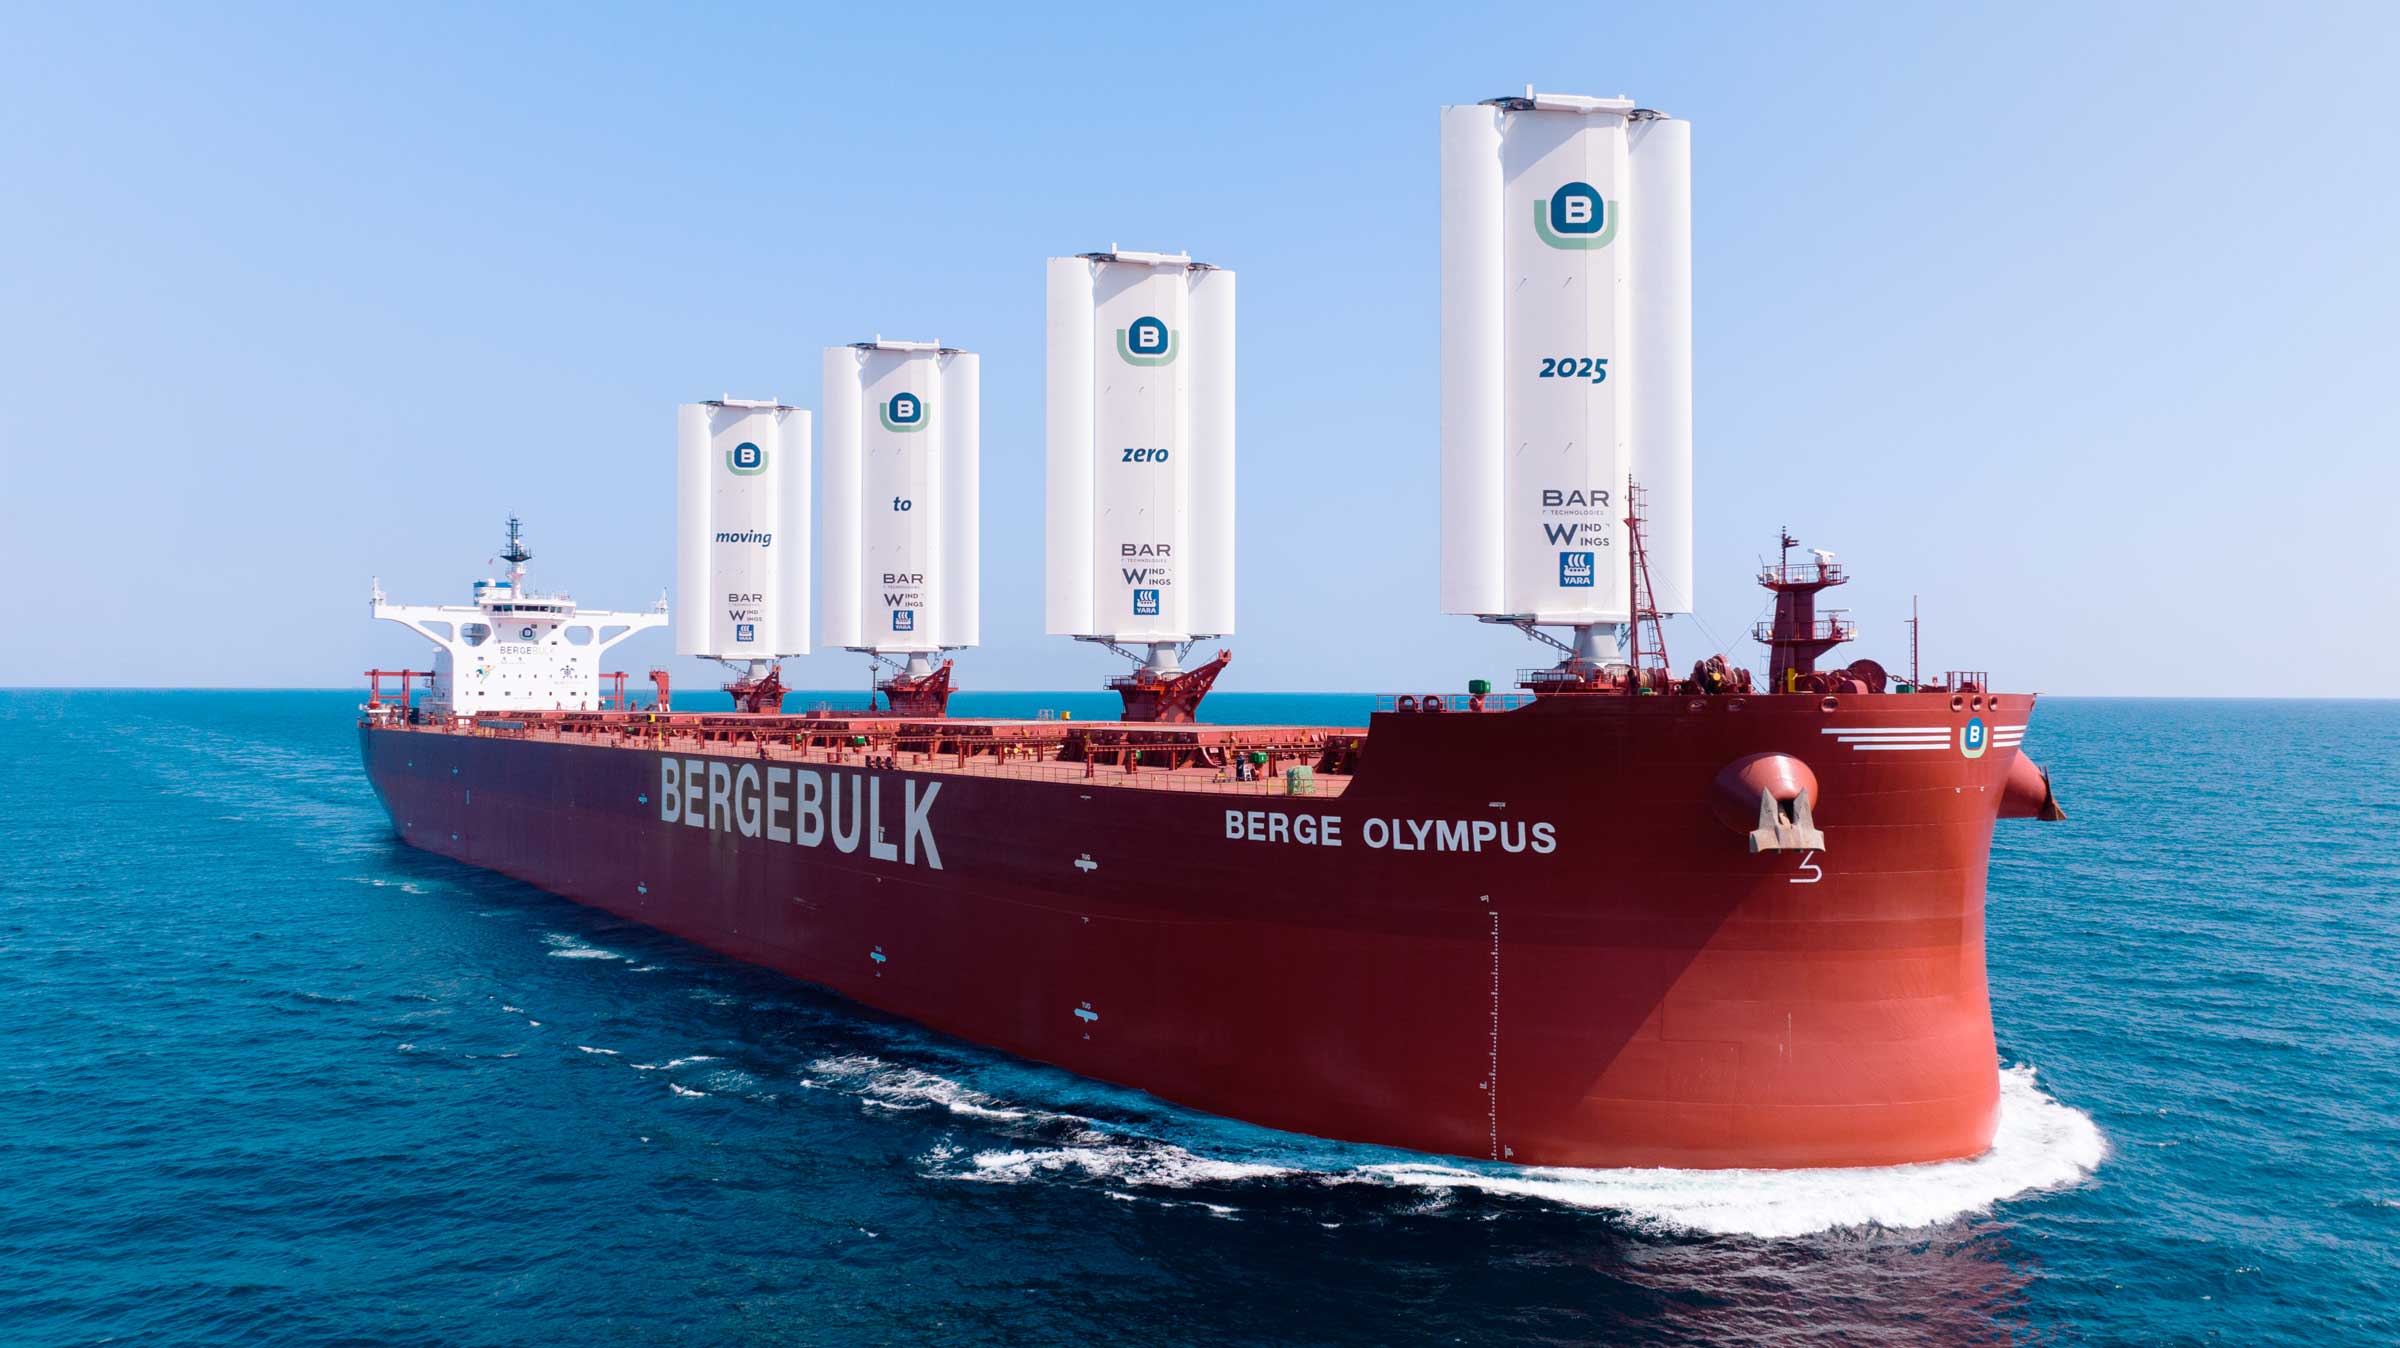 Berge Olympus, the World's most powerful sailing cargo ship